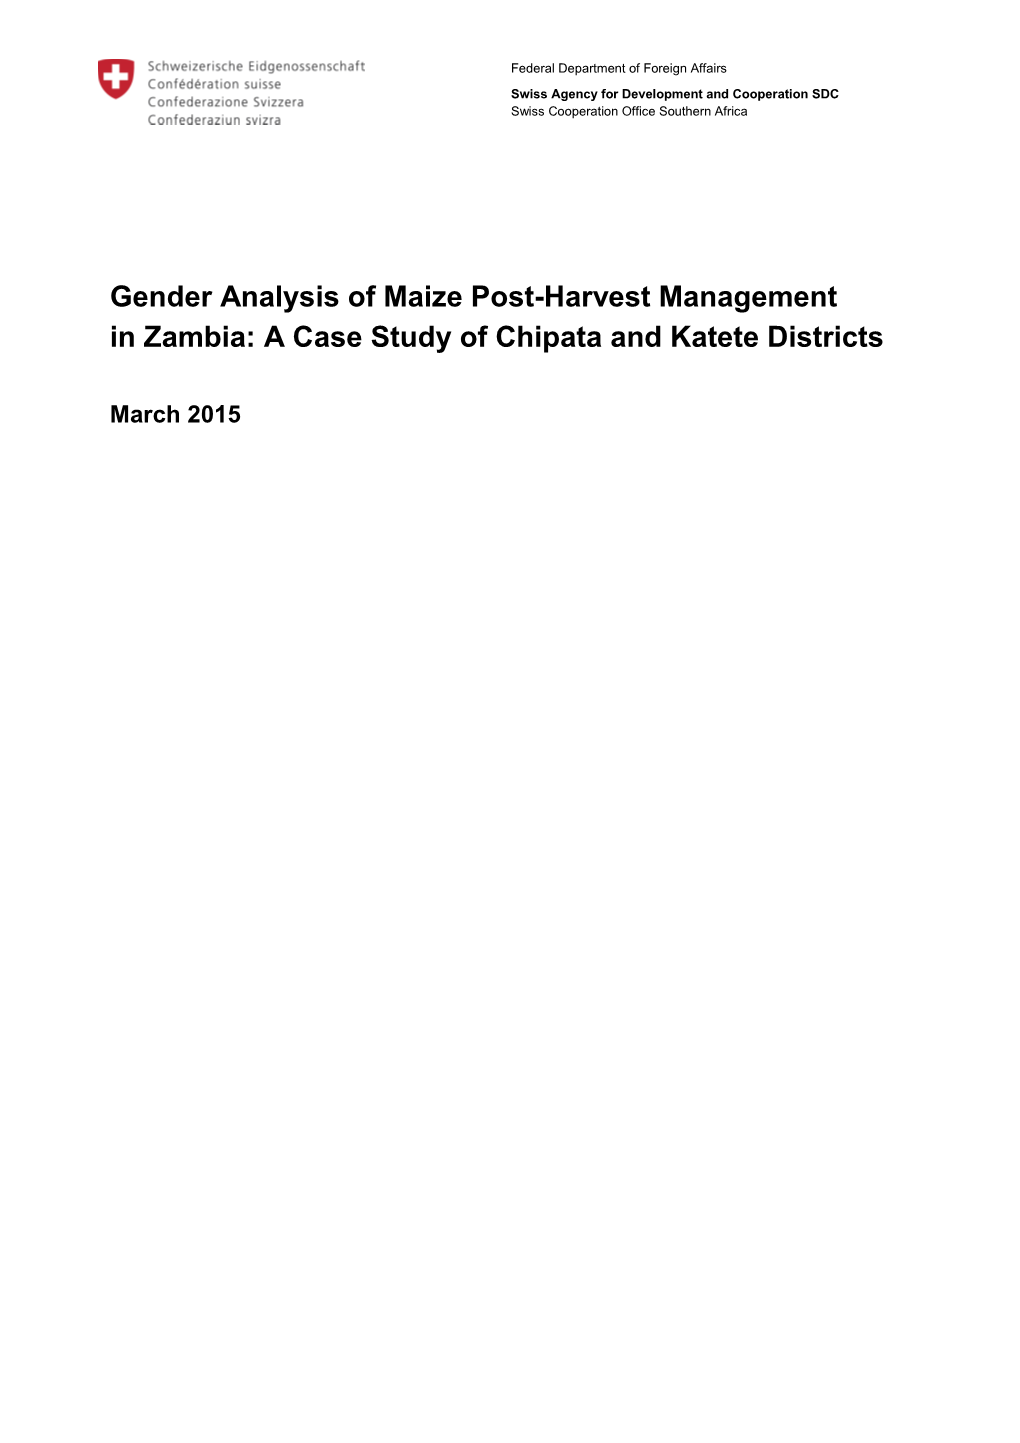 Gender Analysis of Maize Post-Harvest Management in Zambia: a Case Study of Chipata and Katete Districts